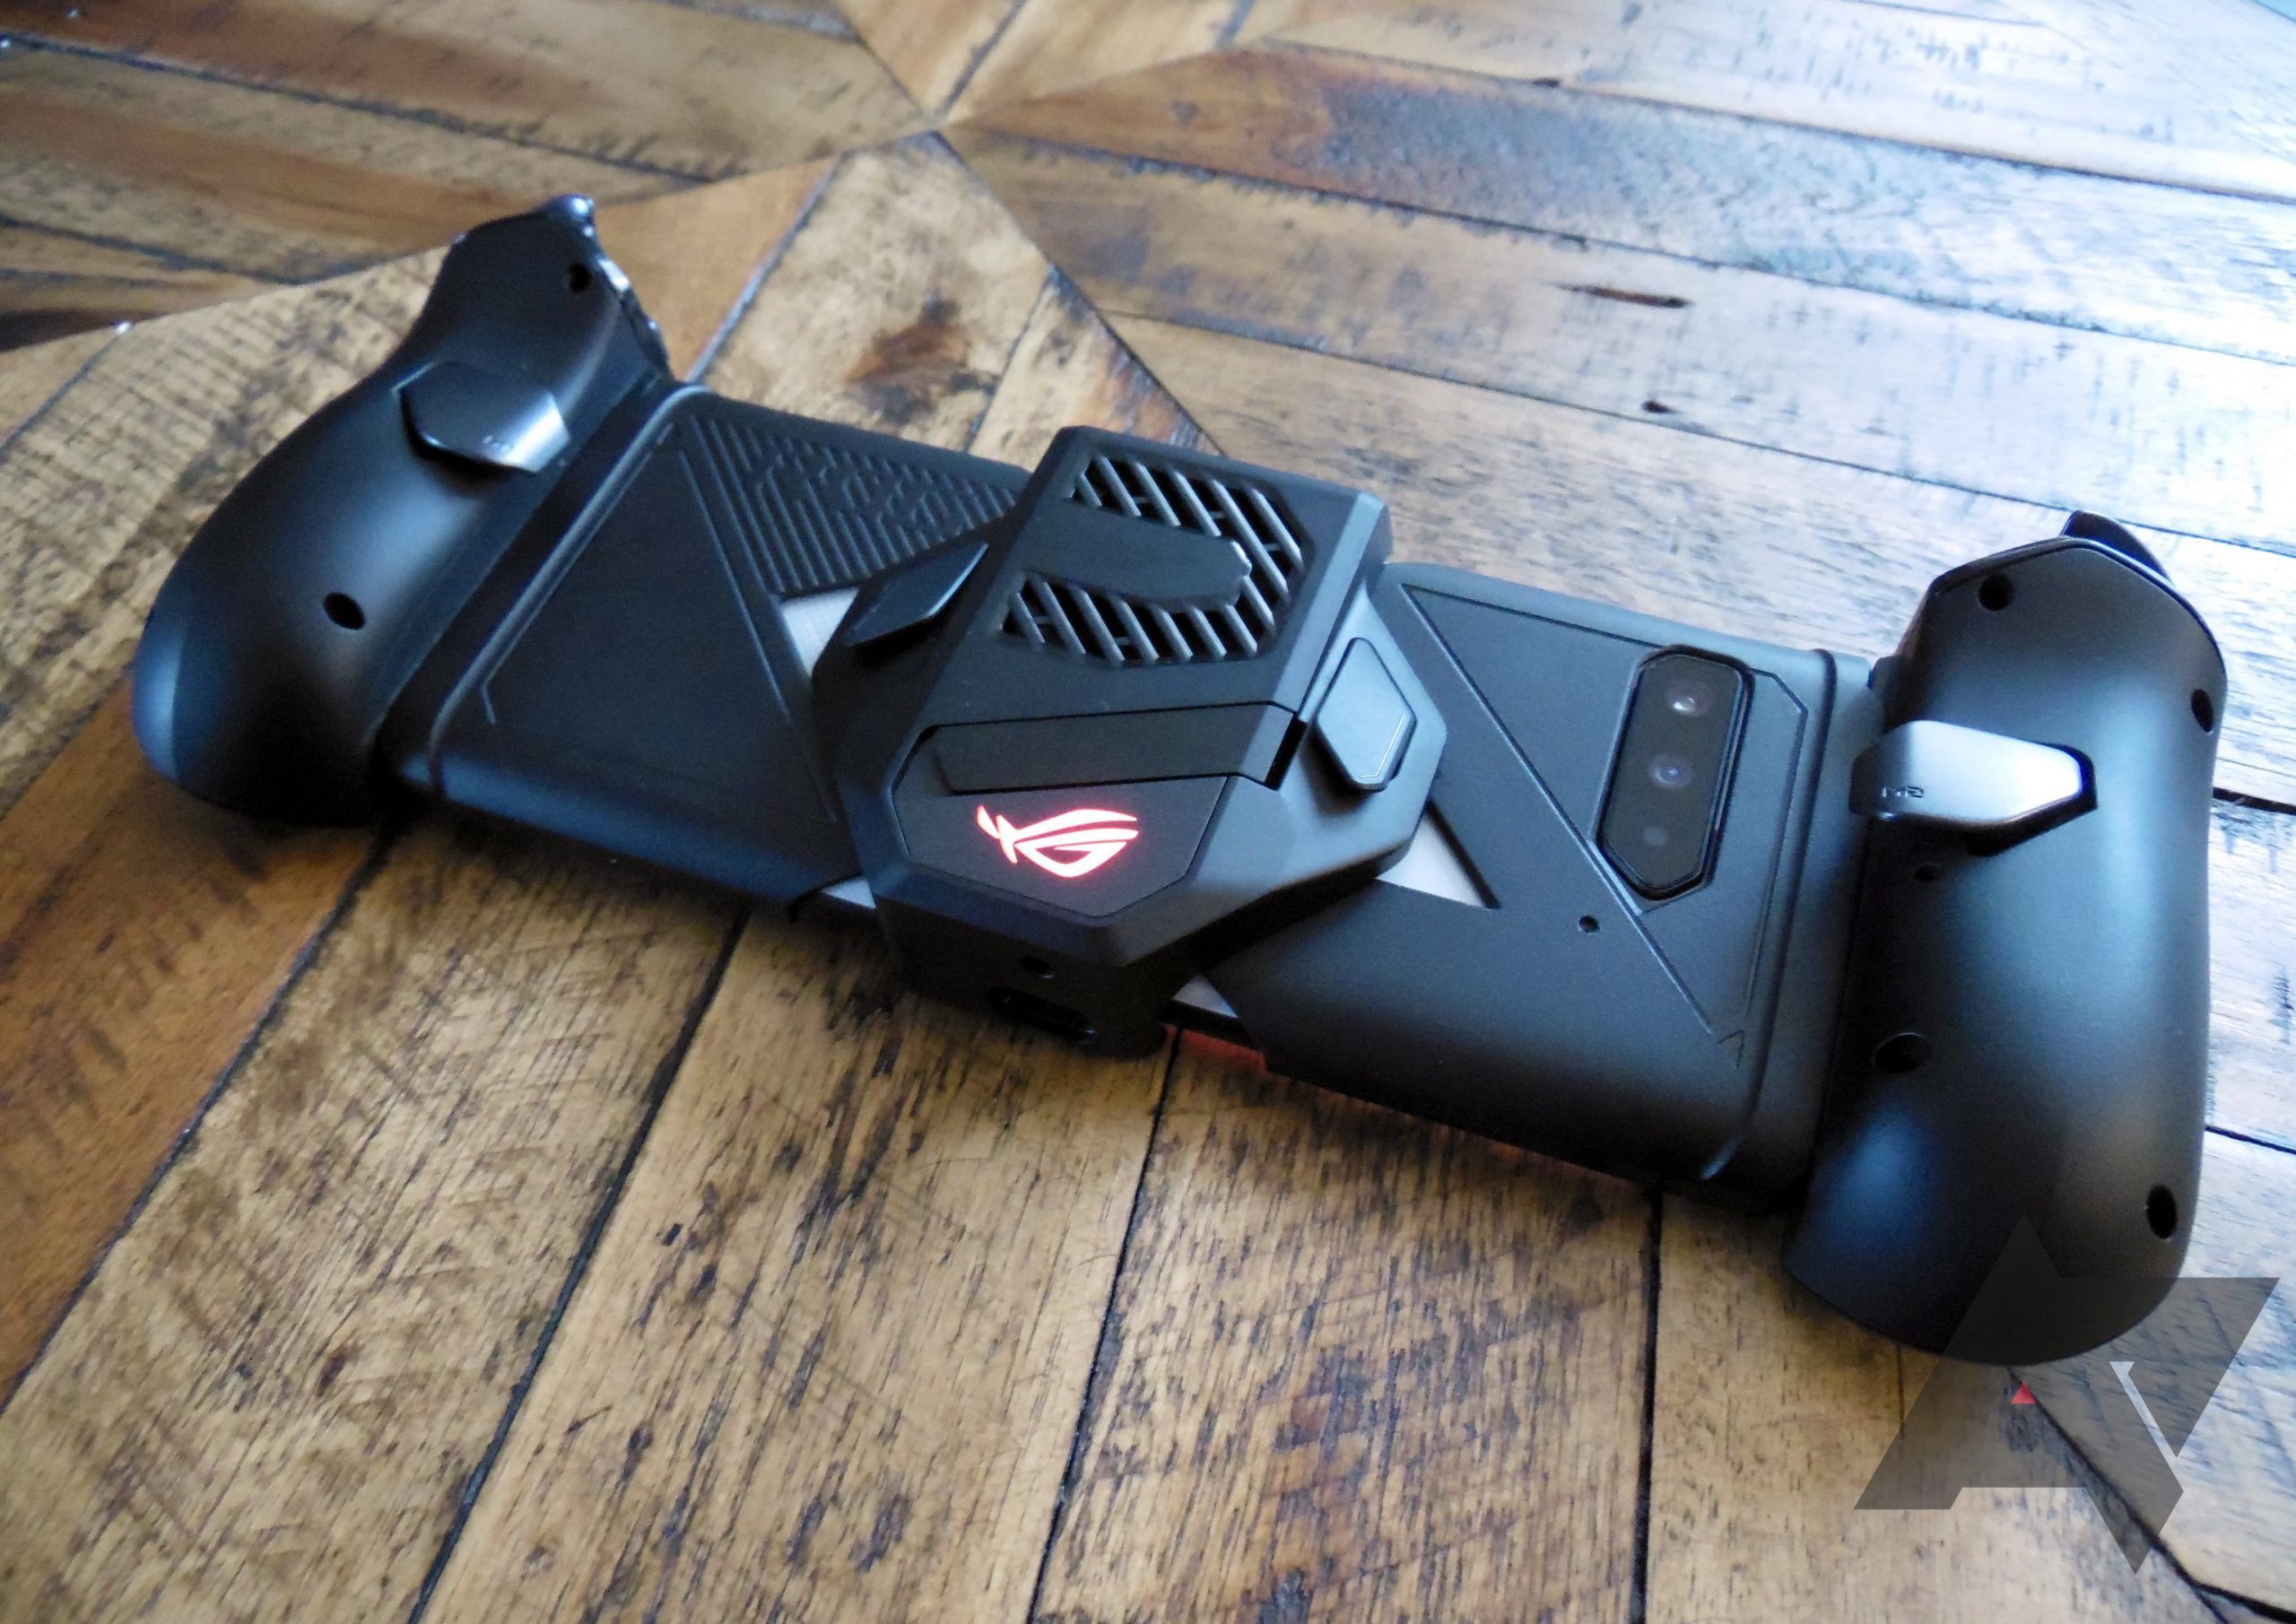 ASUS ROG Phone 5 with its fan and controller equipped